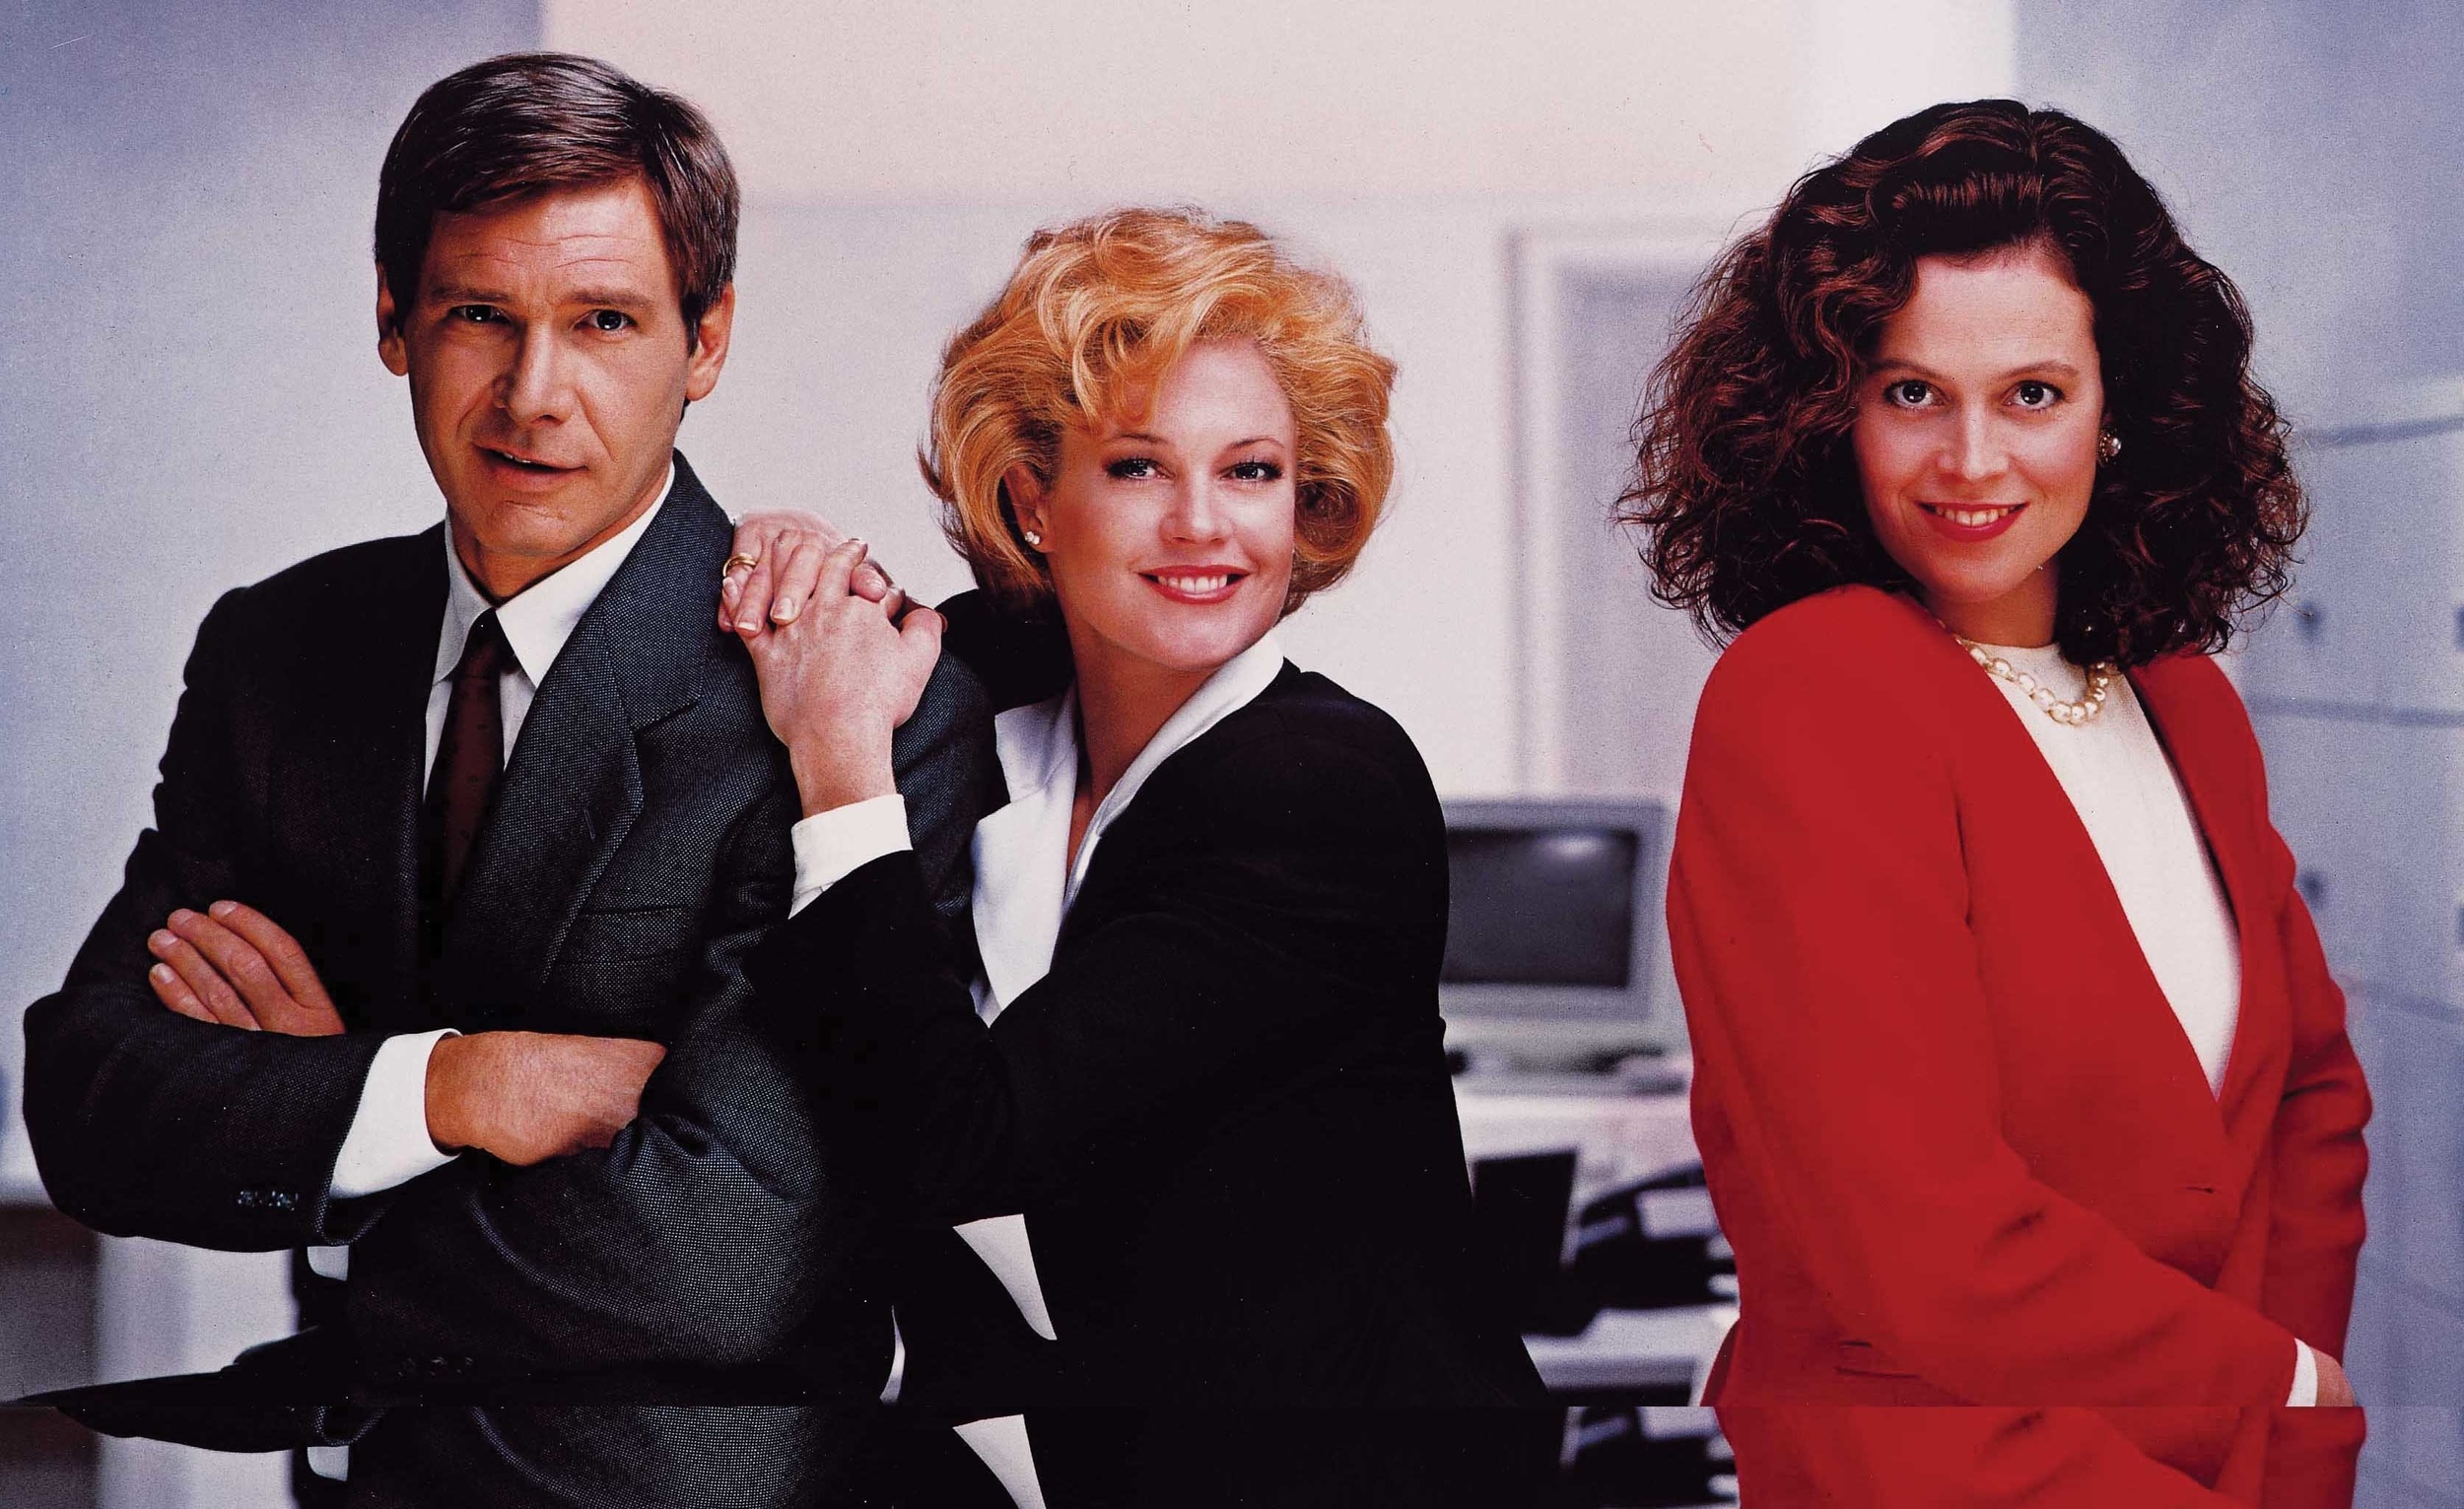 <p>Maybe Ford wasn’t interested in romantic comedies. Maybe filmmakers thought he wasn’t right for those kinds of roles. “Working Girl” showed that he was more than capable, though. Ford and his developing situation with Melanie Griffith is only a part of the film’s story. It’s as much about Griffith trying to rise in the workplace as an ‘80s lady in a world that isn’t always rooting for her. Still, Ford is able to make a big impact, even though he didn’t really end up going the romantic comedy route all that often.</p><p>You may also like: <a href='https://www.yardbarker.com/entertainment/articles/20_movies_based_on_real_life_legal_battles_and_court_cases_033124/s1__38554636'>20 movies based on real-life legal battles and court cases</a></p>